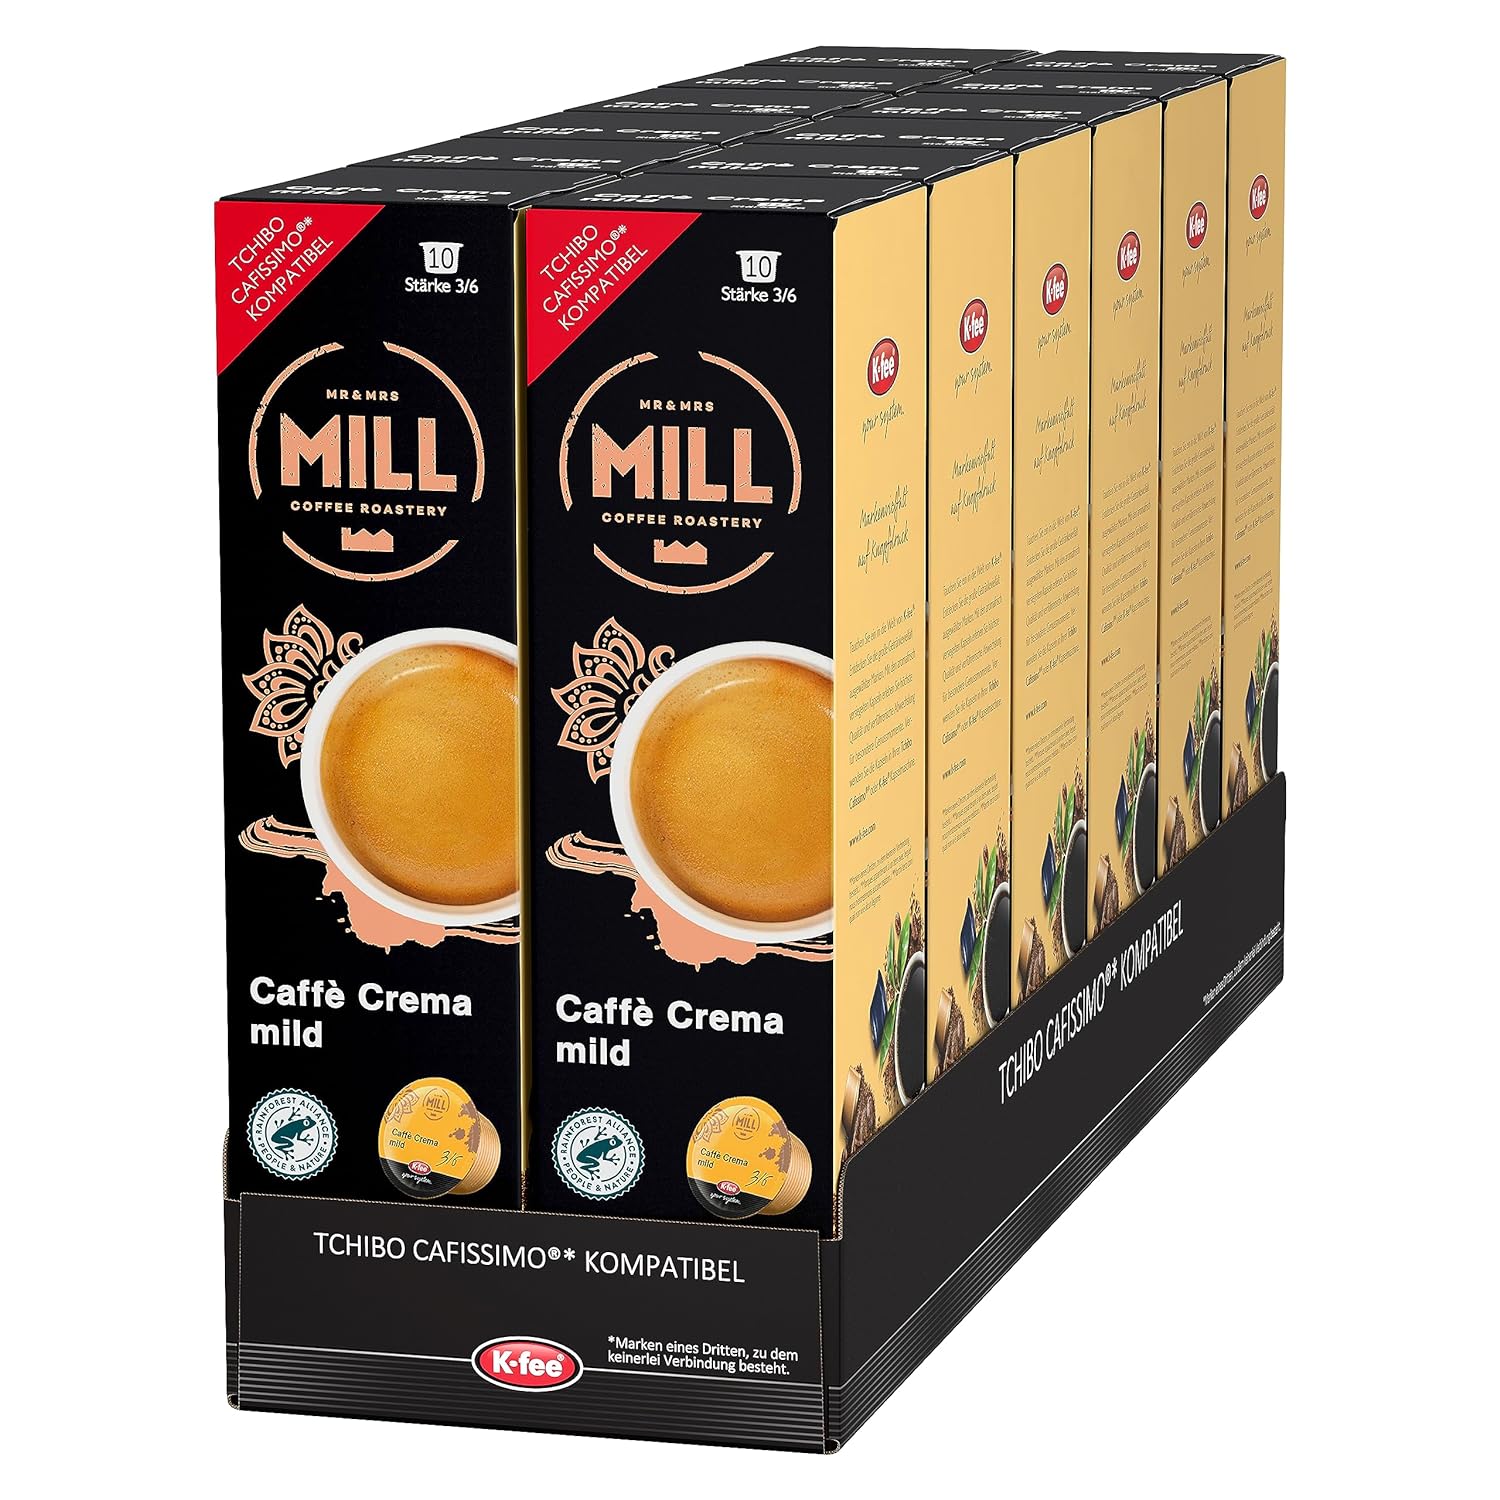 Mr & Mrs Mill Coffee Capsules Caffè Crema Mild, Strength 3/6, Compatible with K-fee & Tchibo Cafissimo*, Rainforest Alliance Certified, 120 Capsules (12 x 10)